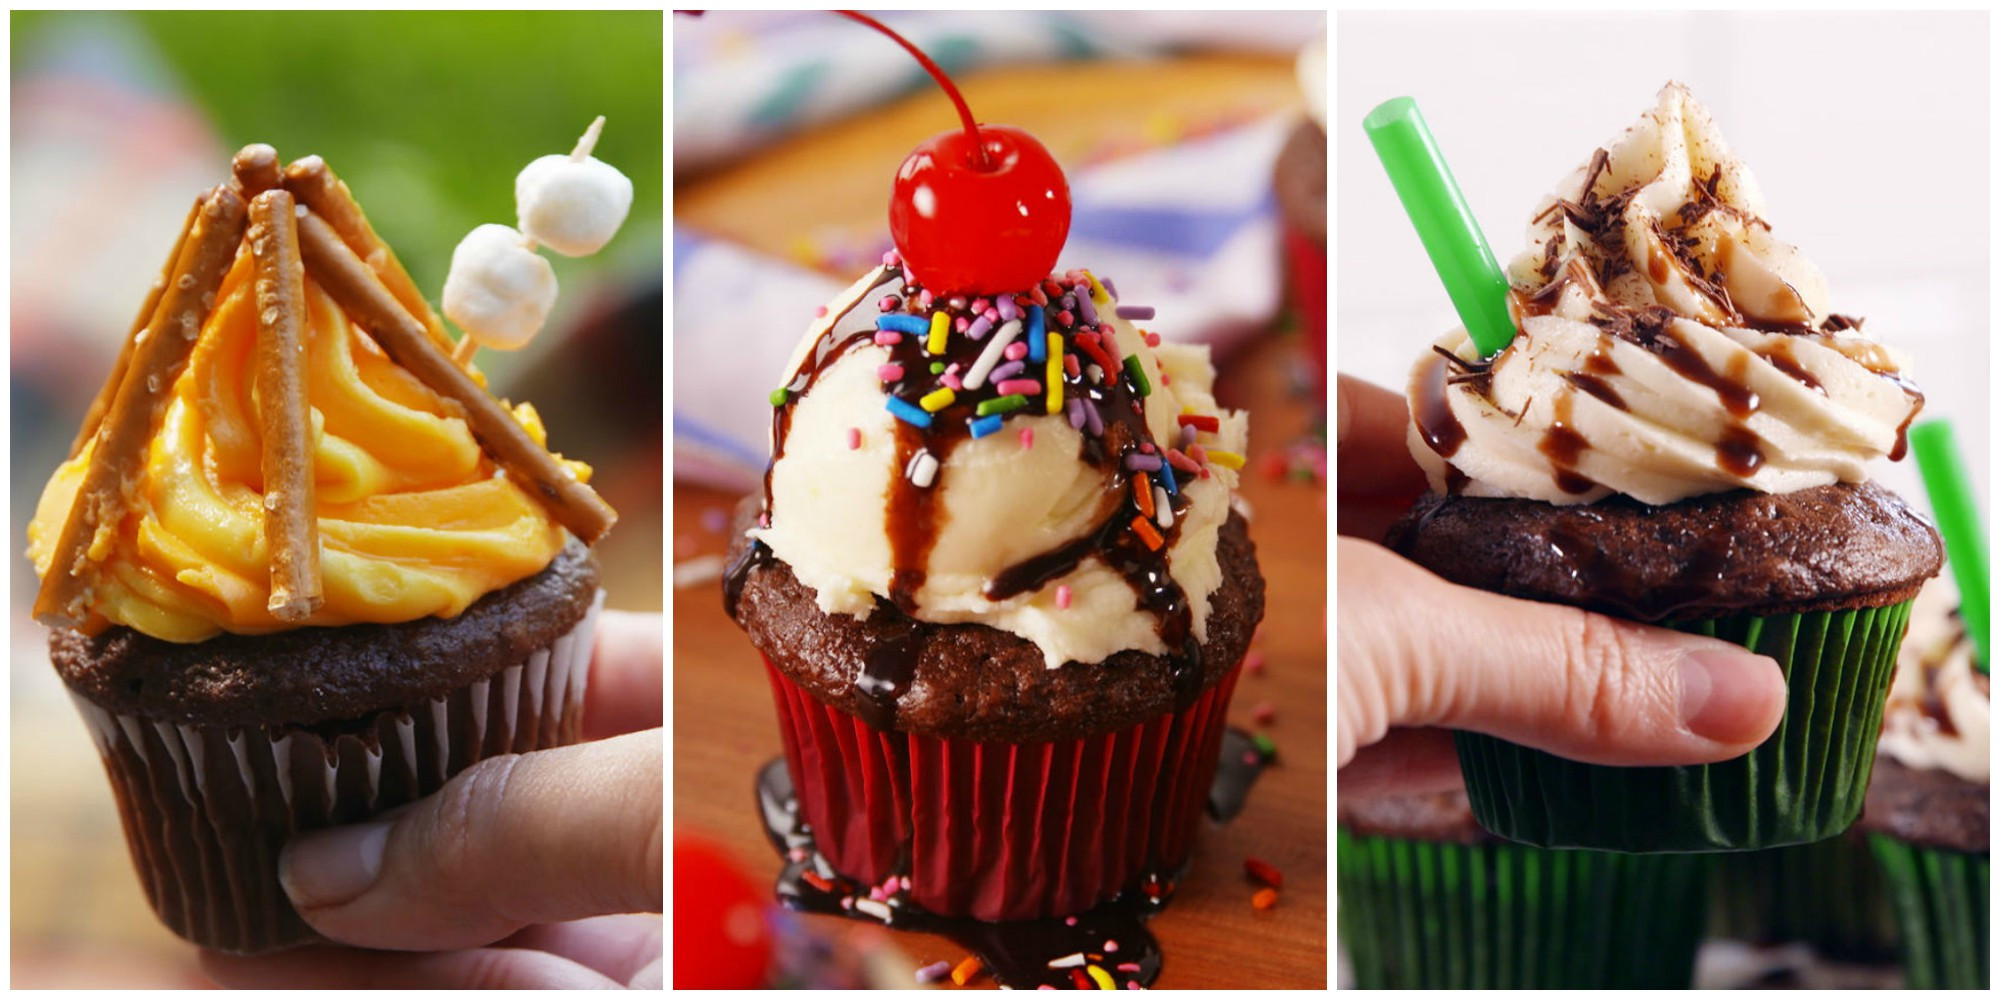 Cupcake Decorating Ideas For Kids
 10 Easy Cupcake Recipes for Kids Cute Cupcake Decorating